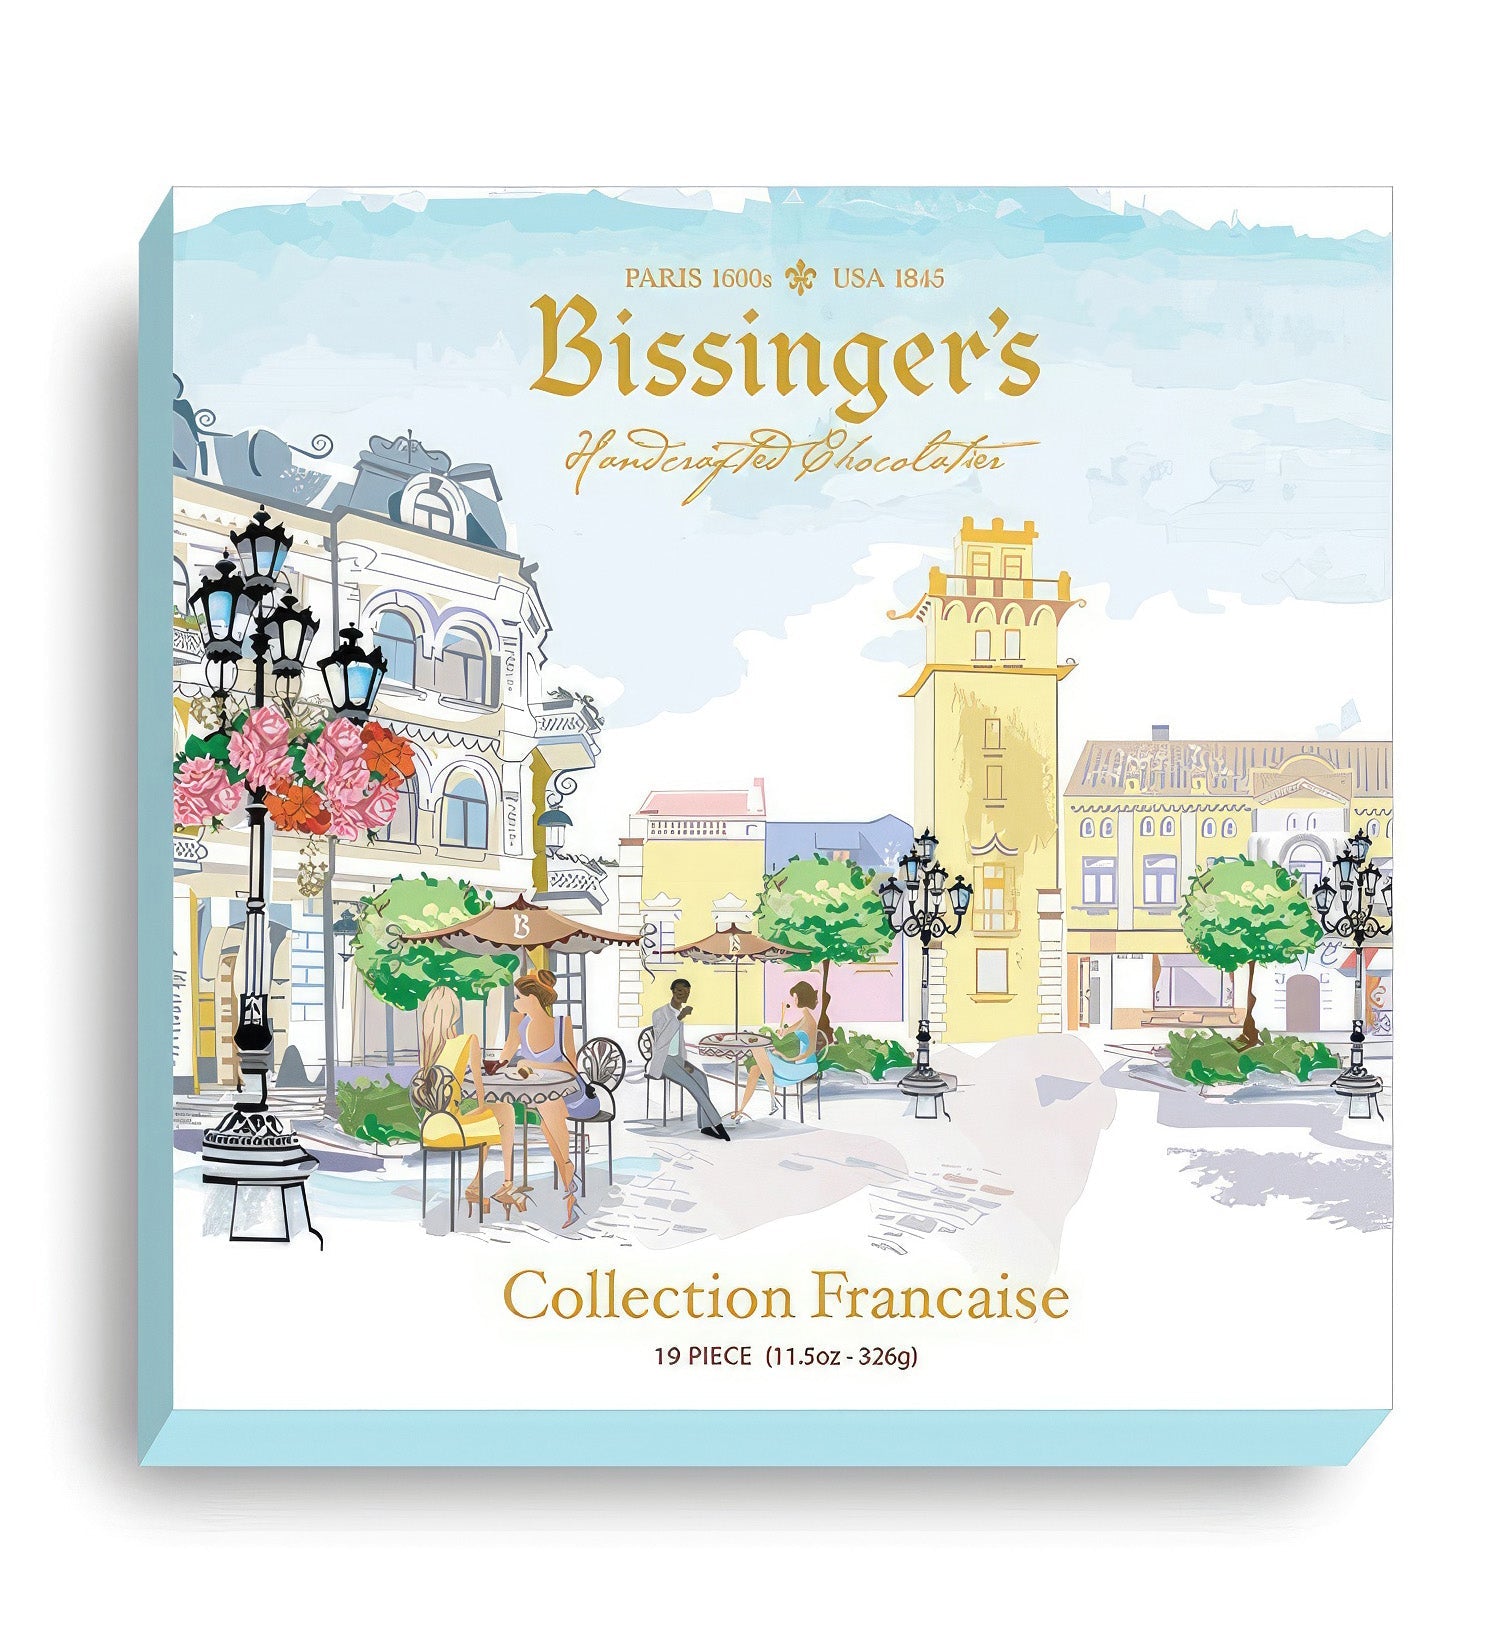 Bissinger's French Connection Chocolate